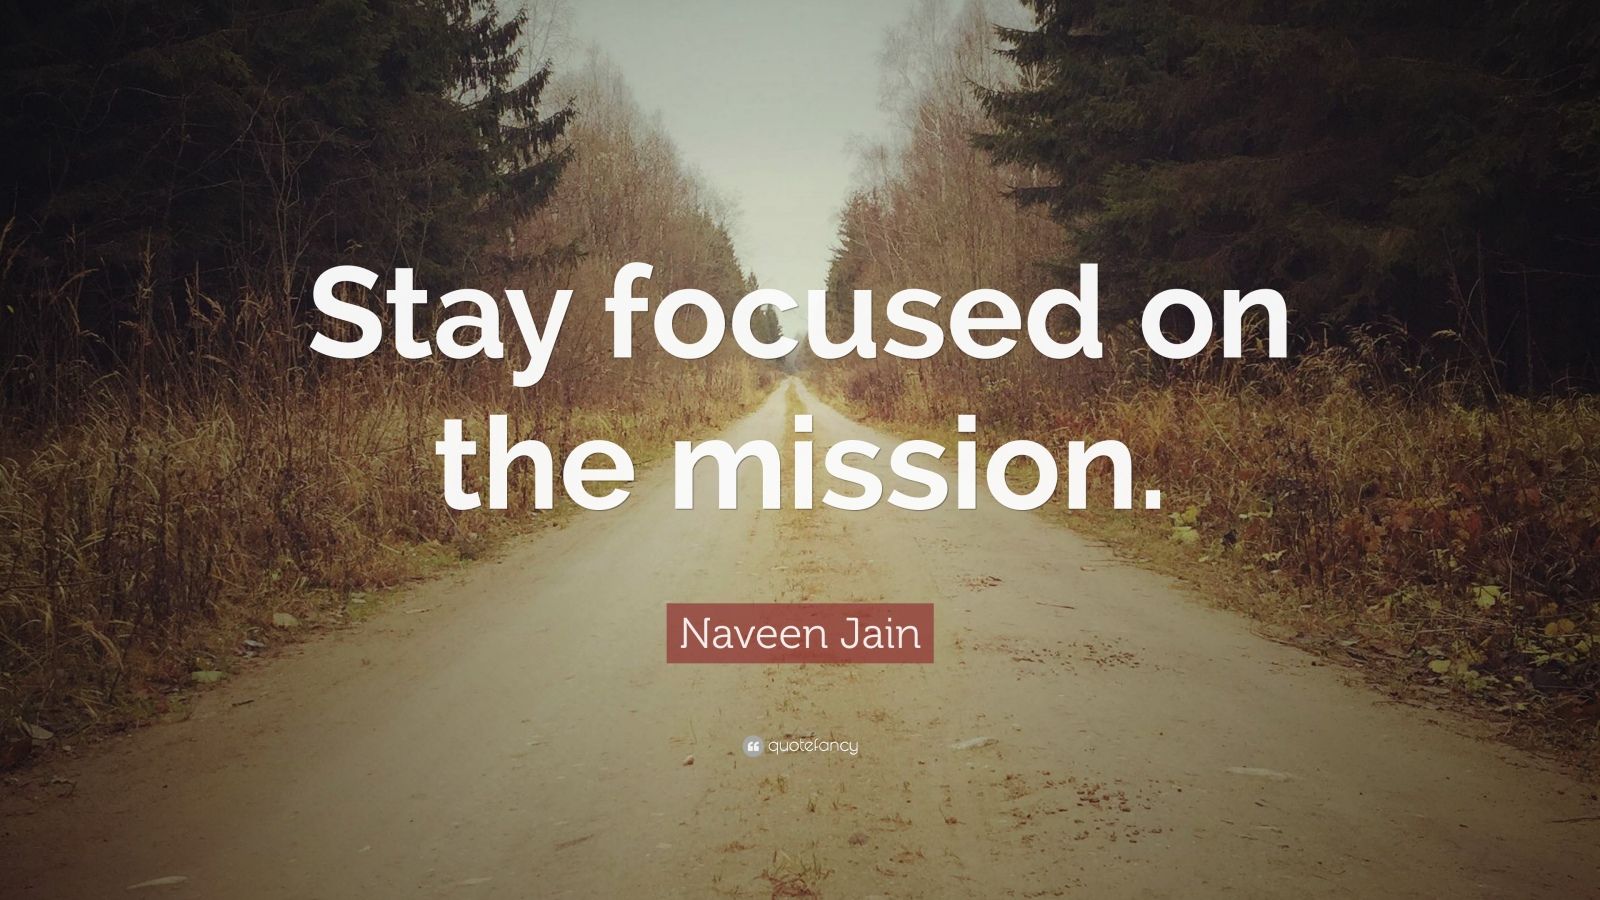 Naveen Jain Quote: “Stay focused on the mission.” (12 wallpapers